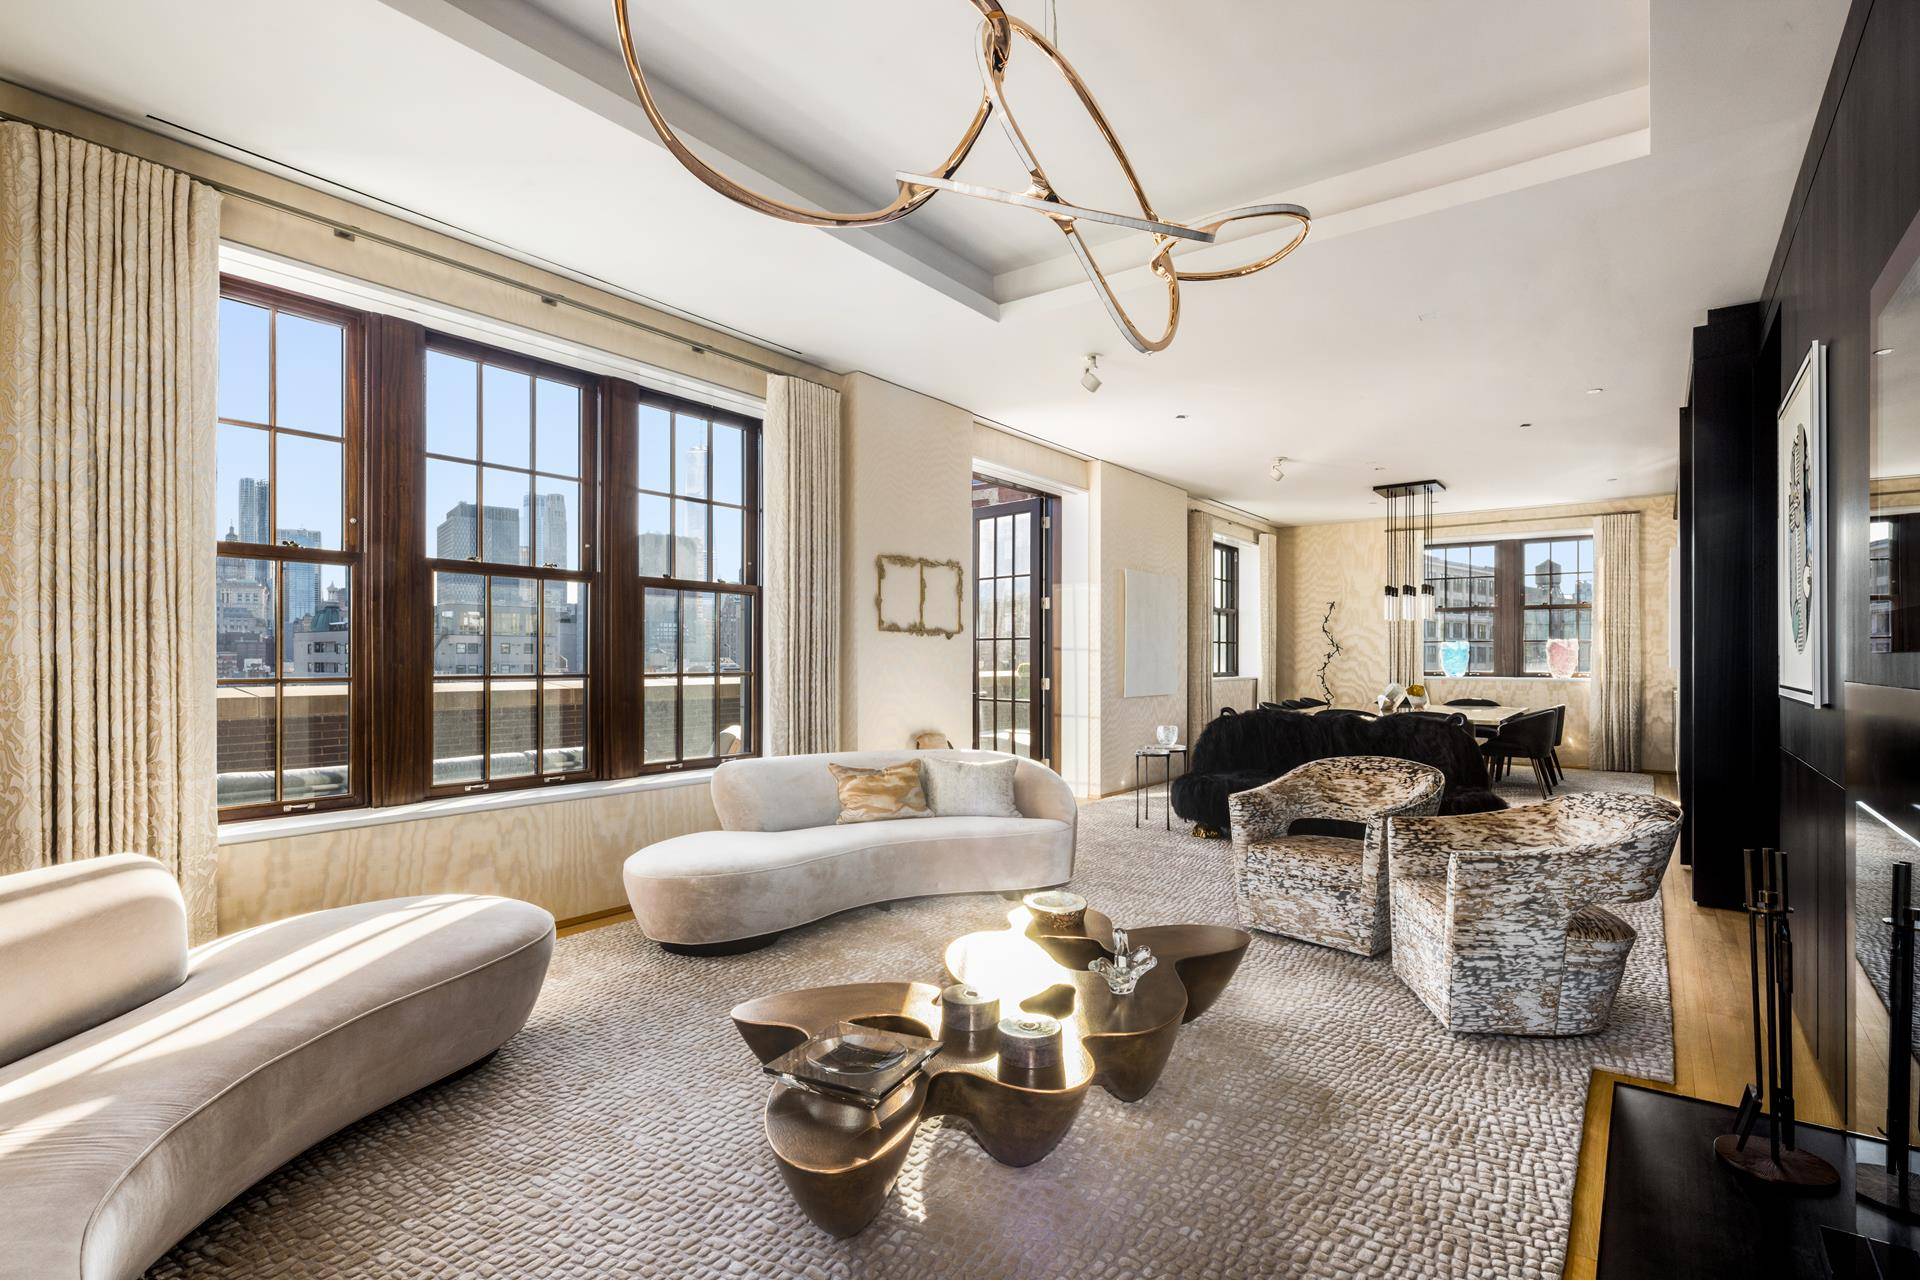 The Penthouse at 224 Mulberry is a custom, one of a kind duplex residence crowning one of downtown Manhattan's premier full service boutique pre war condominiums.